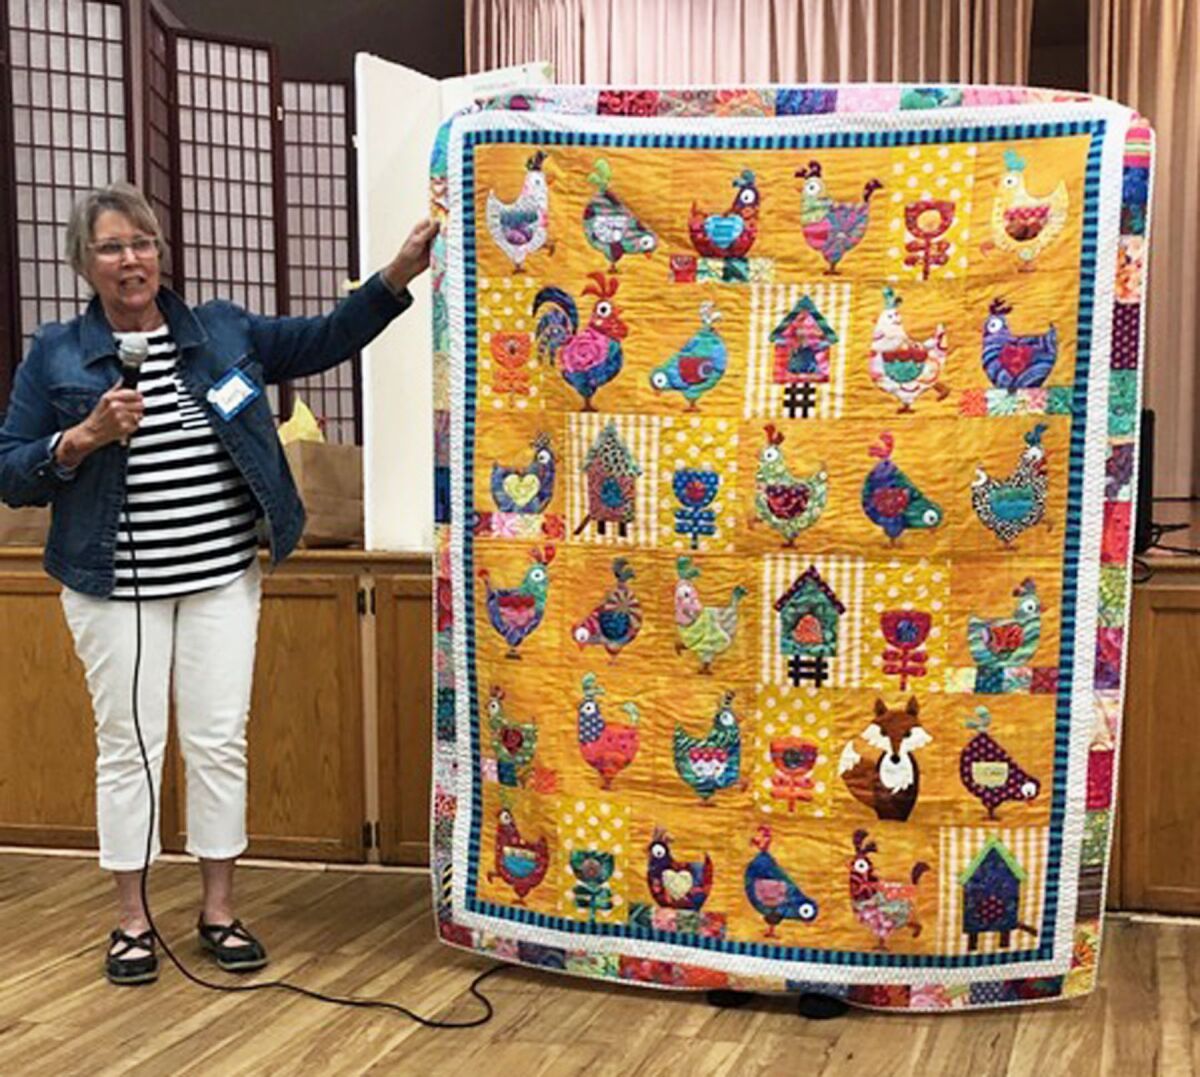 Carol Simpson talking about a chicken-themed quilt during a Seaside Quilter Guild meeting’s “Show and Tell” time.